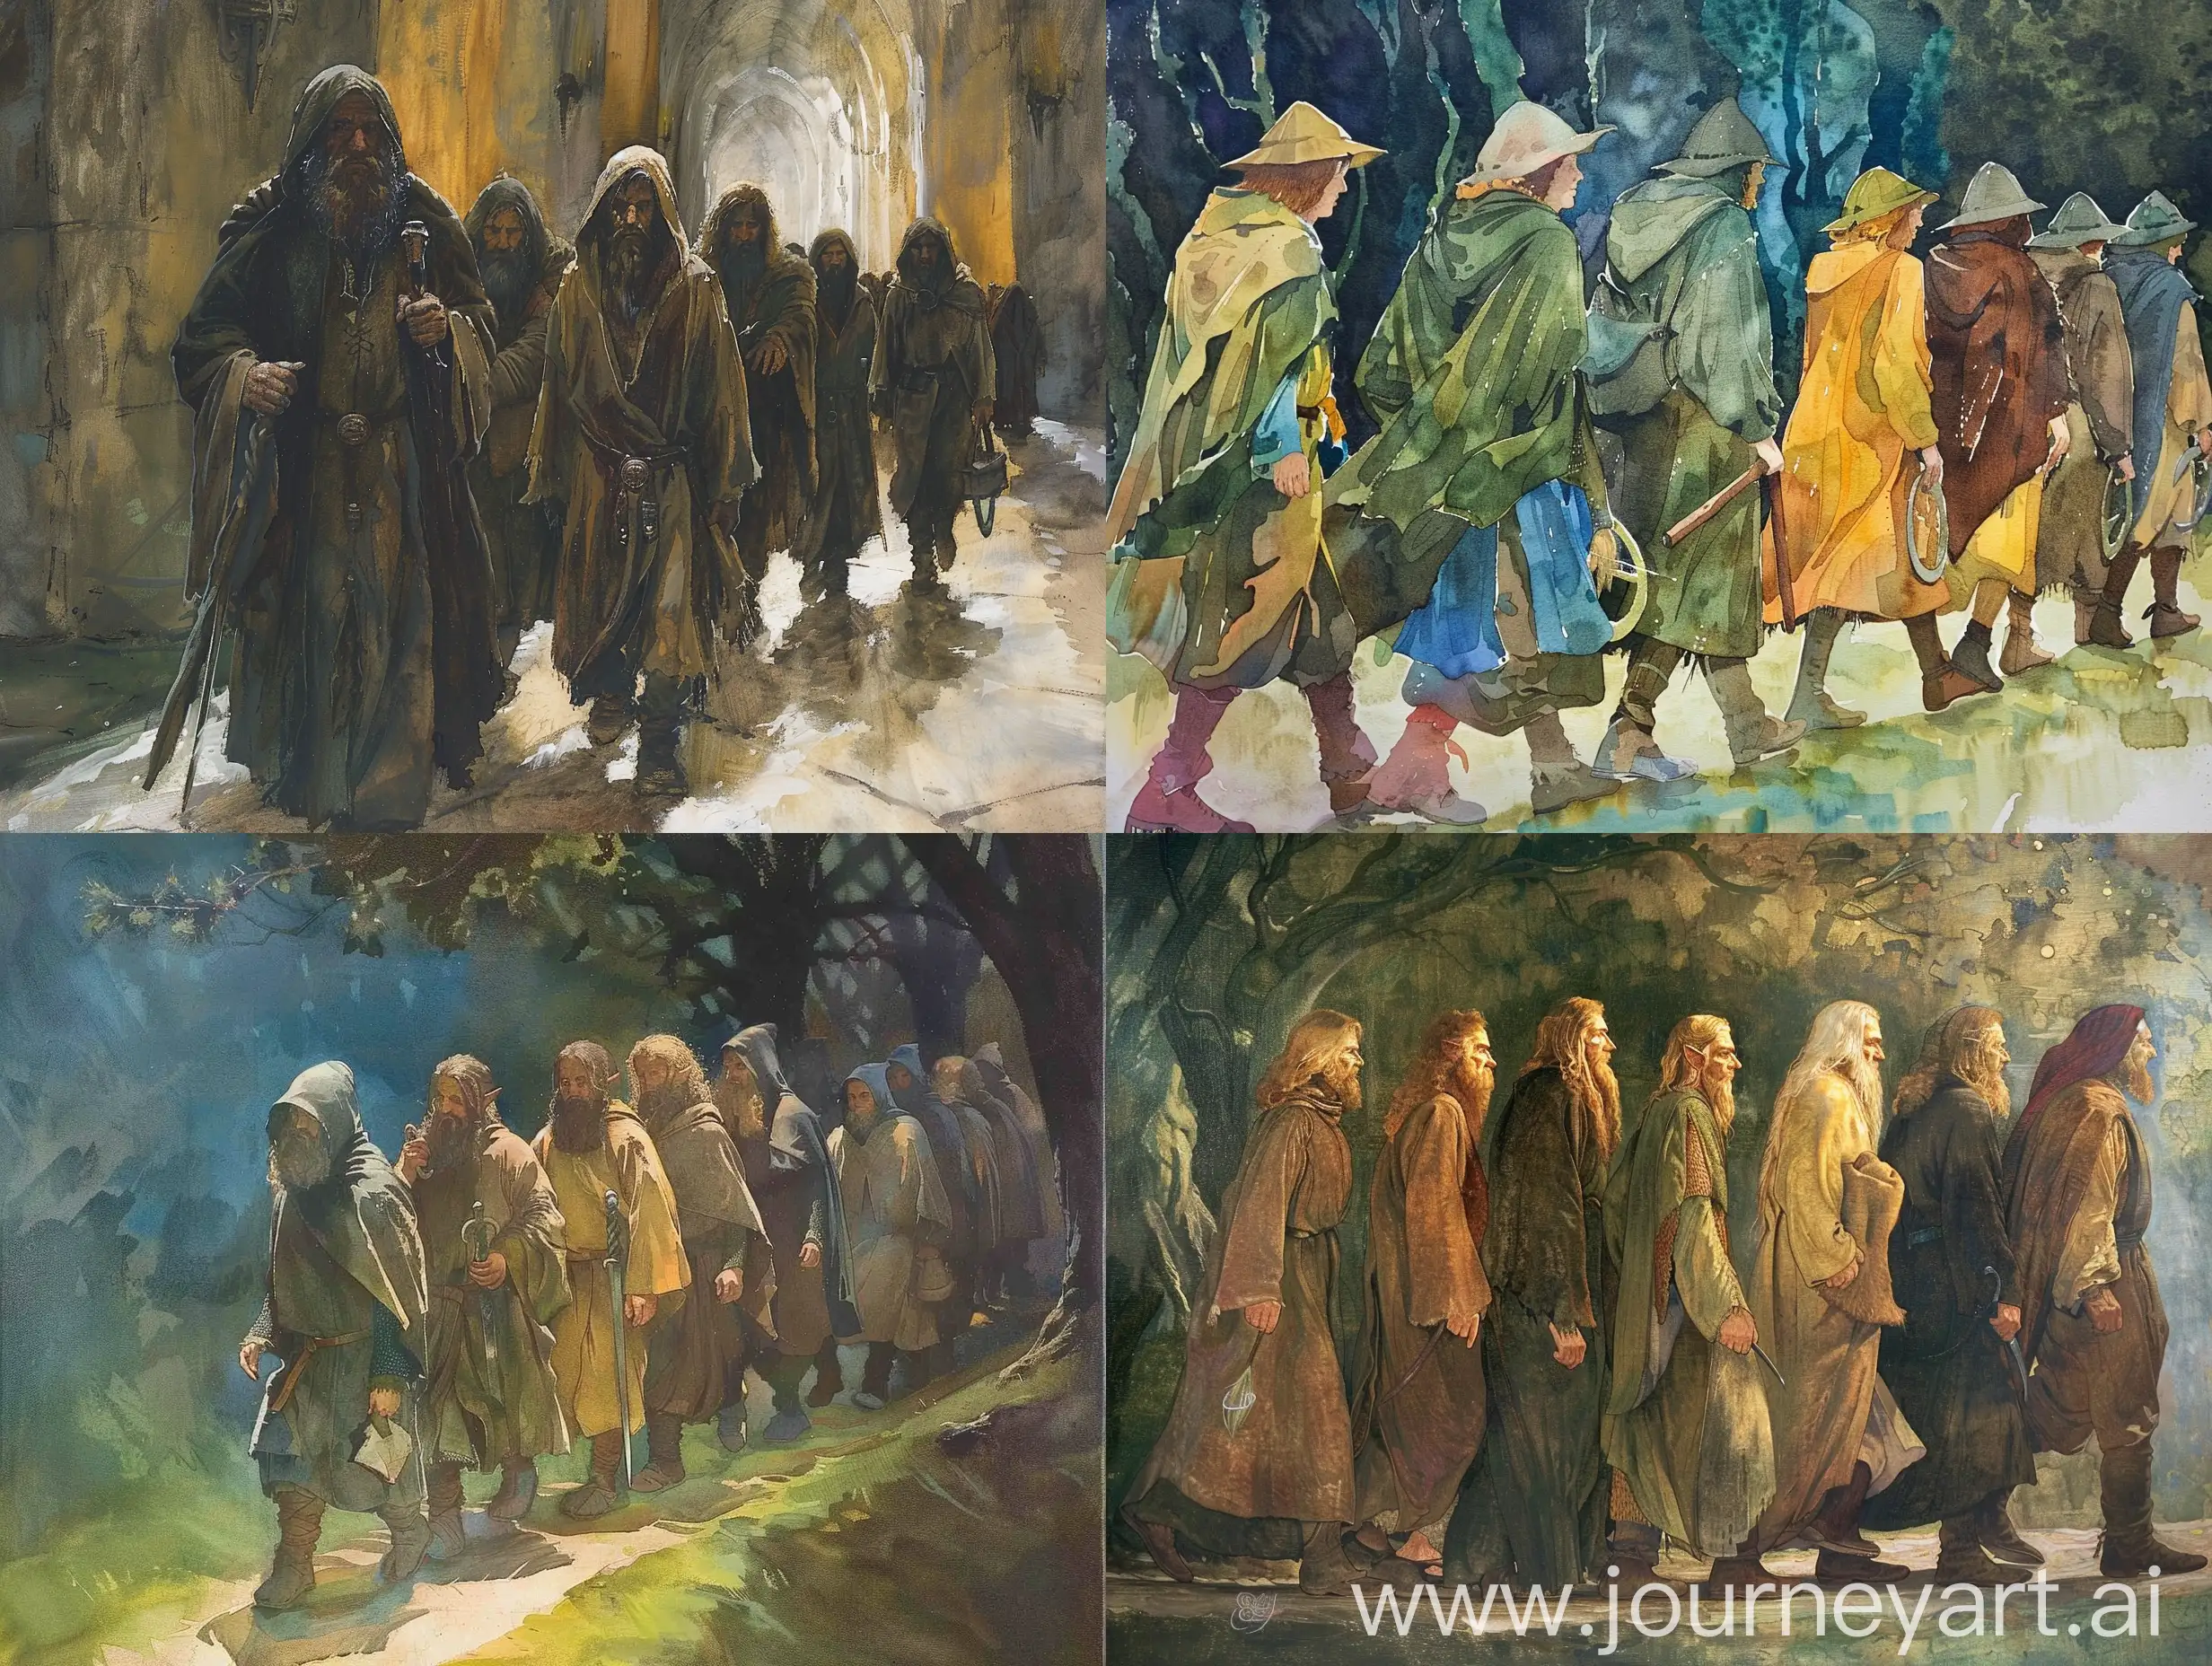 the fellowship of the ring, walking in line, early 1900s style art, painted, book illustration